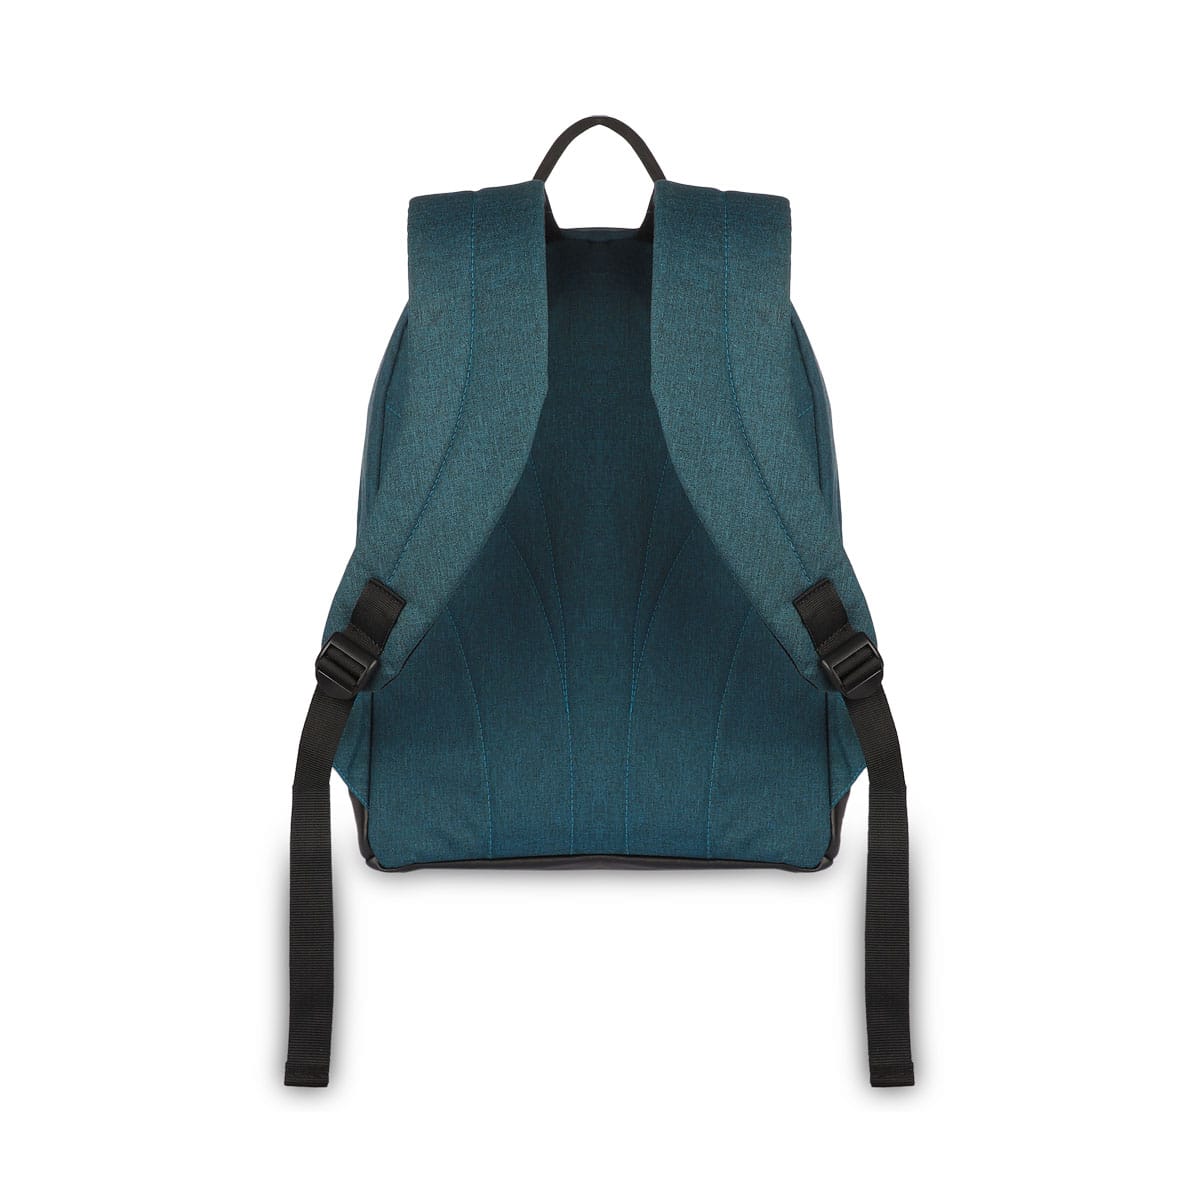 Moss Green | Protecta Chain Reaction Laptop Backpack-3